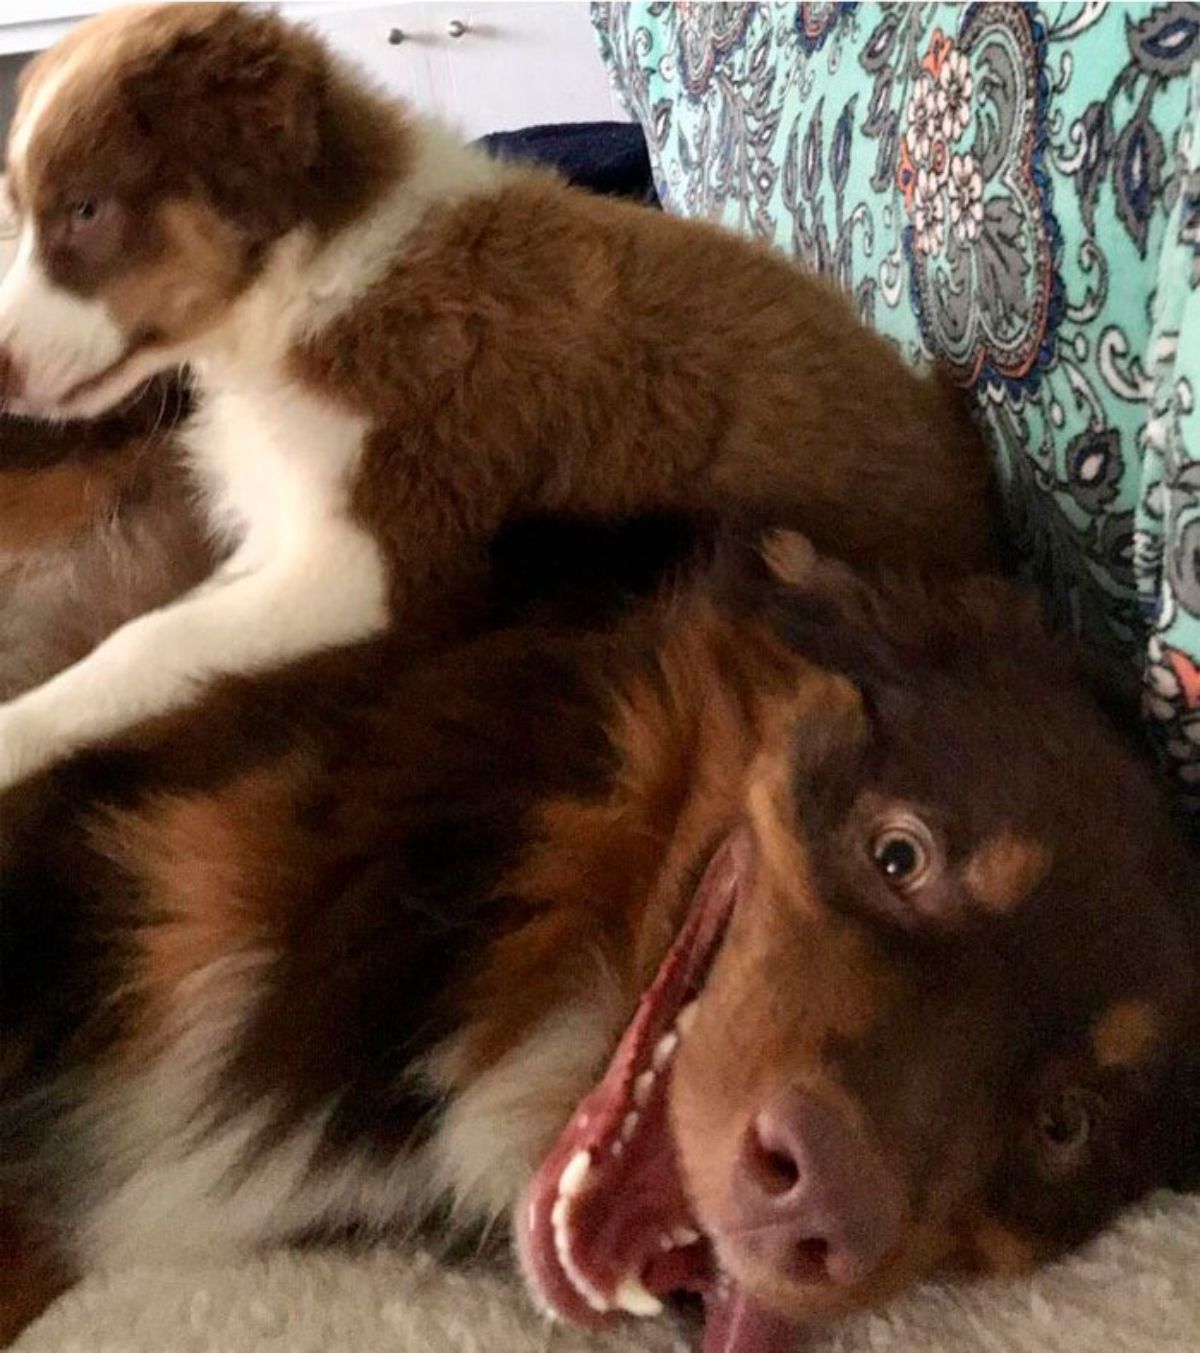 brown and white puppy on a fluffy brown dog who has a big smile